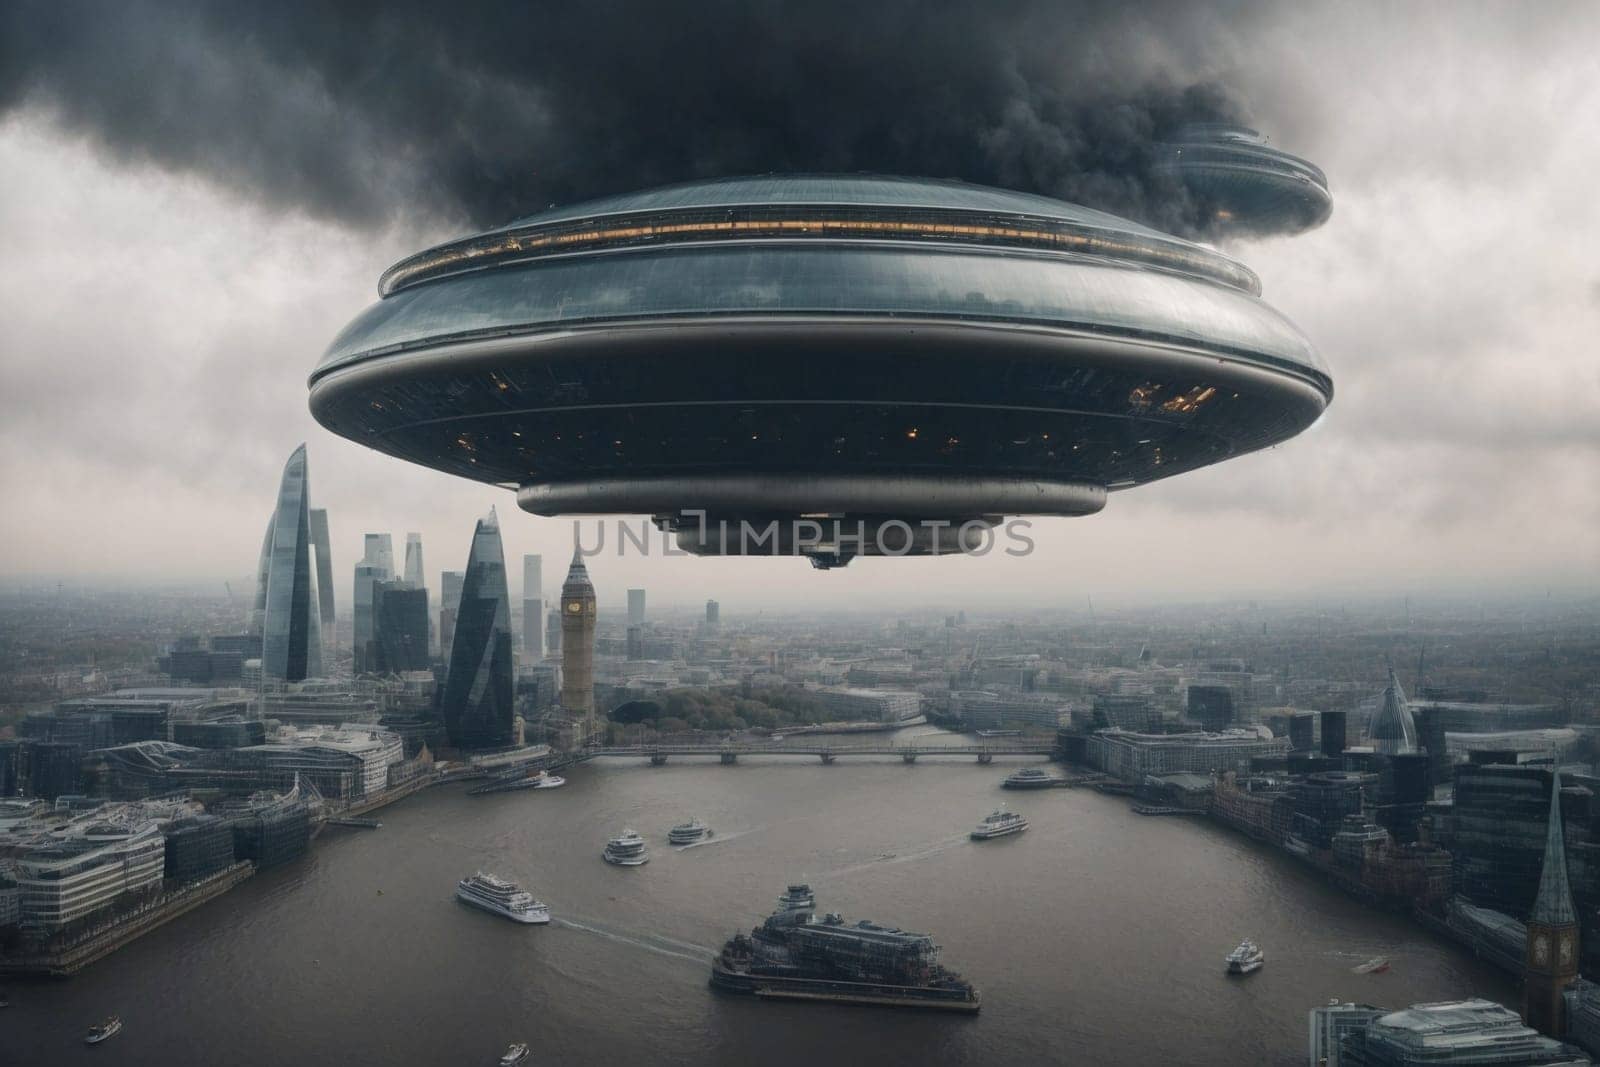 A colossal flying object, defying gravity, is seen suspended above the city in a remarkable display of mystery and wonder.